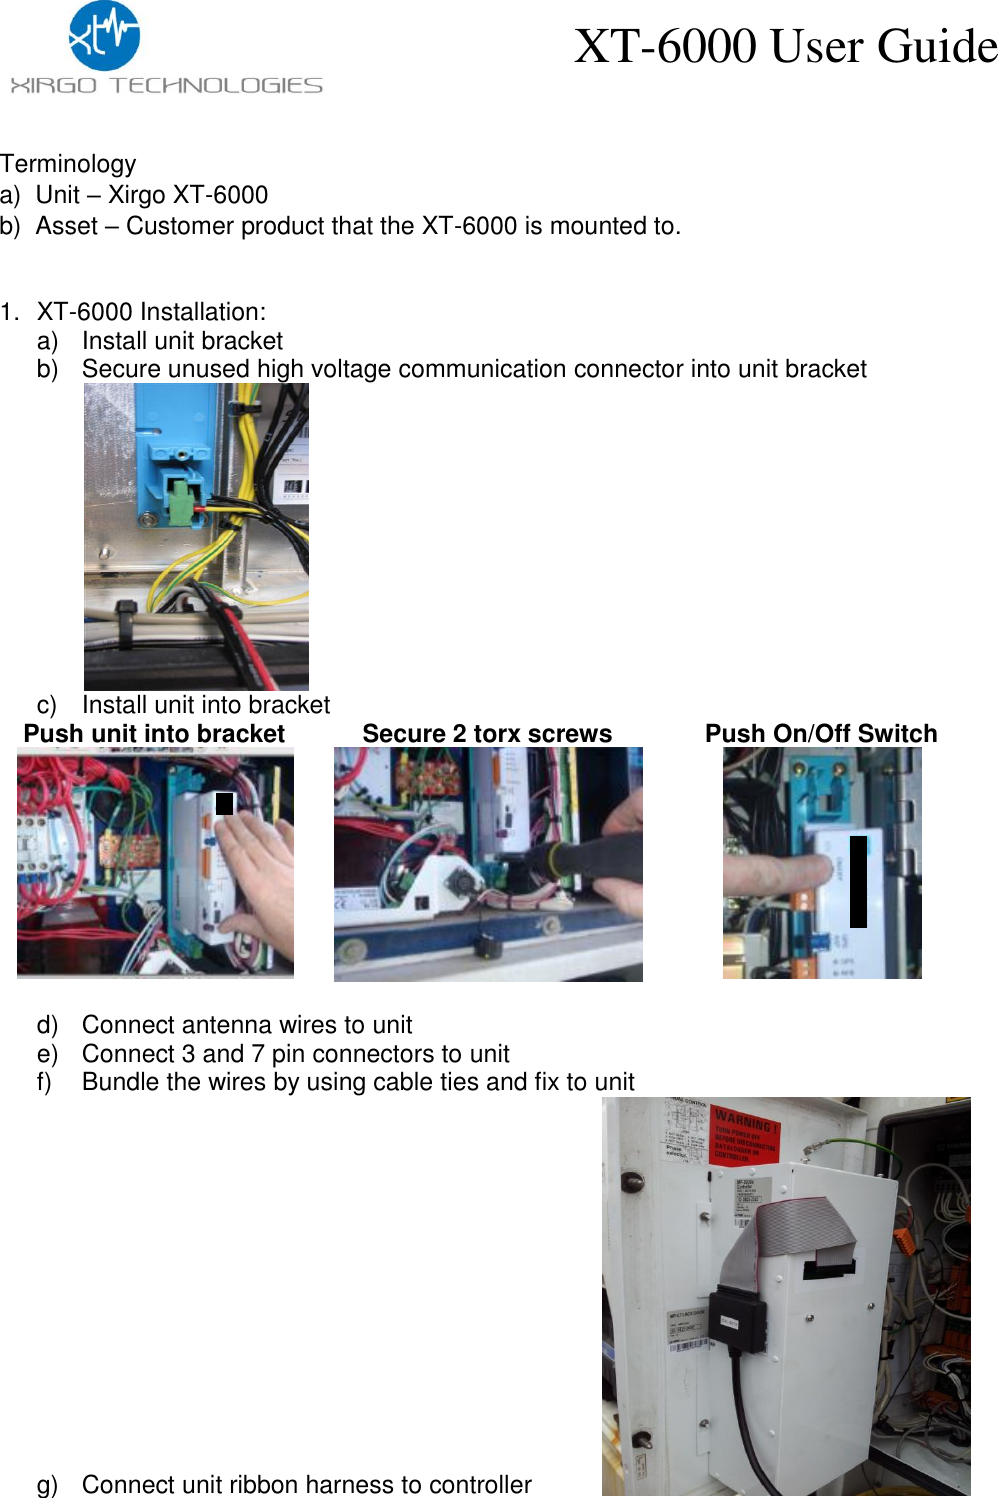    XT-6000 User Guide Terminology a)  Unit – Xirgo XT-6000 b)  Asset – Customer product that the XT-6000 is mounted to.  1. XT-6000 Installation: a)  Install unit bracket b)  Secure unused high voltage communication connector into unit bracket    c)  Install unit into bracket Push unit into bracket  Secure 2 torx screws   Push On/Off Switch   d)  Connect antenna wires to unit e)  Connect 3 and 7 pin connectors to unit f)  Bundle the wires by using cable ties and fix to unit g)  Connect unit ribbon harness to controller          